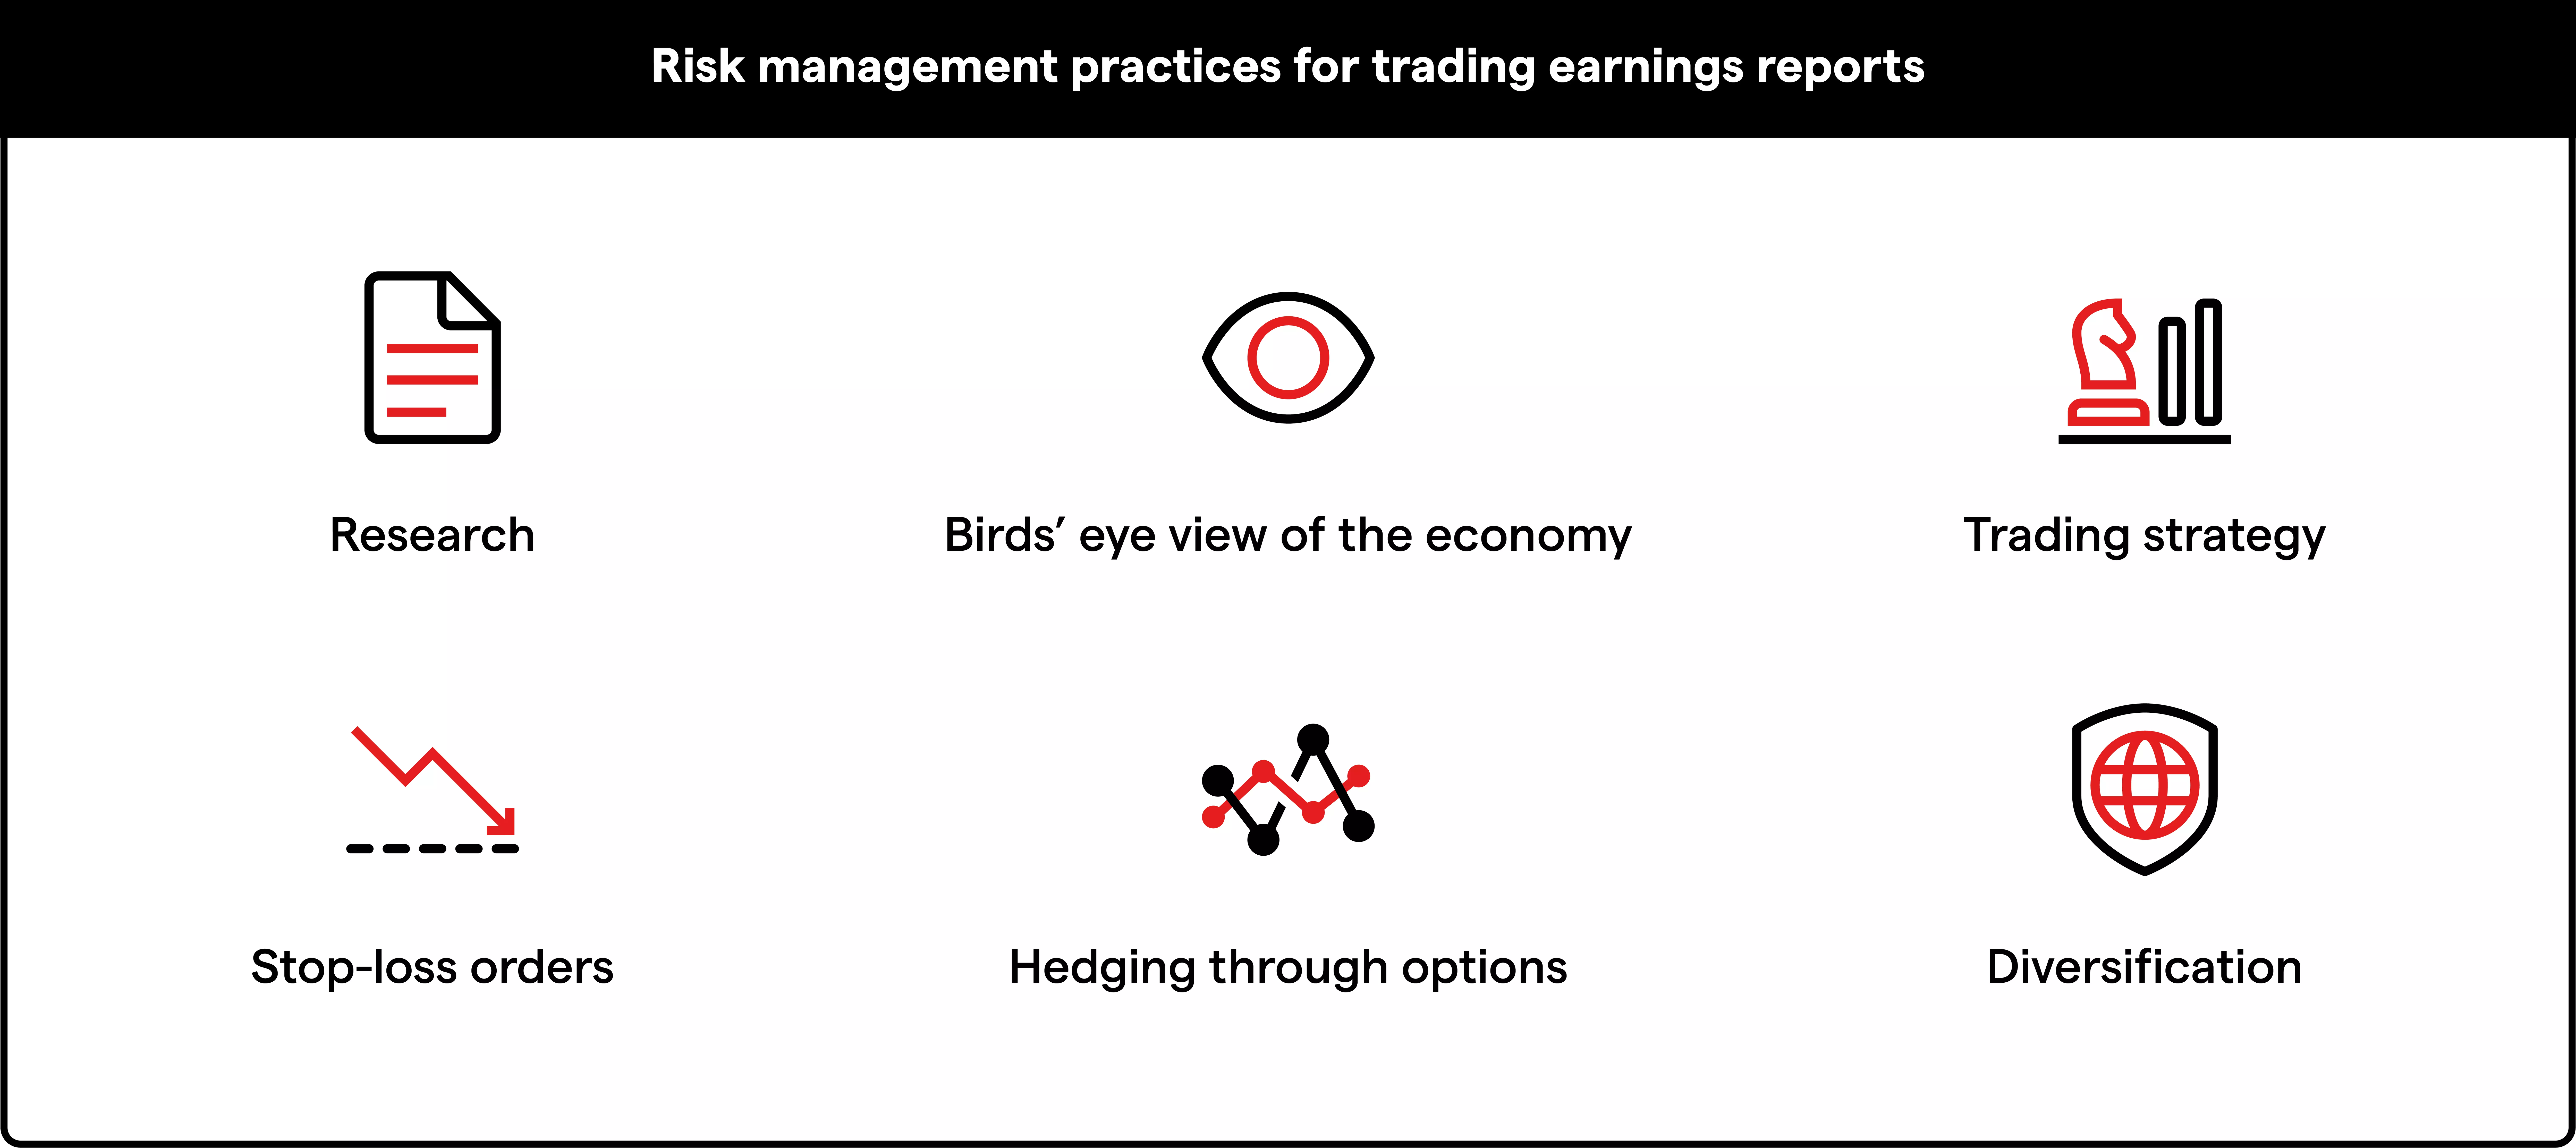 Risk management practises for trading earnings reports